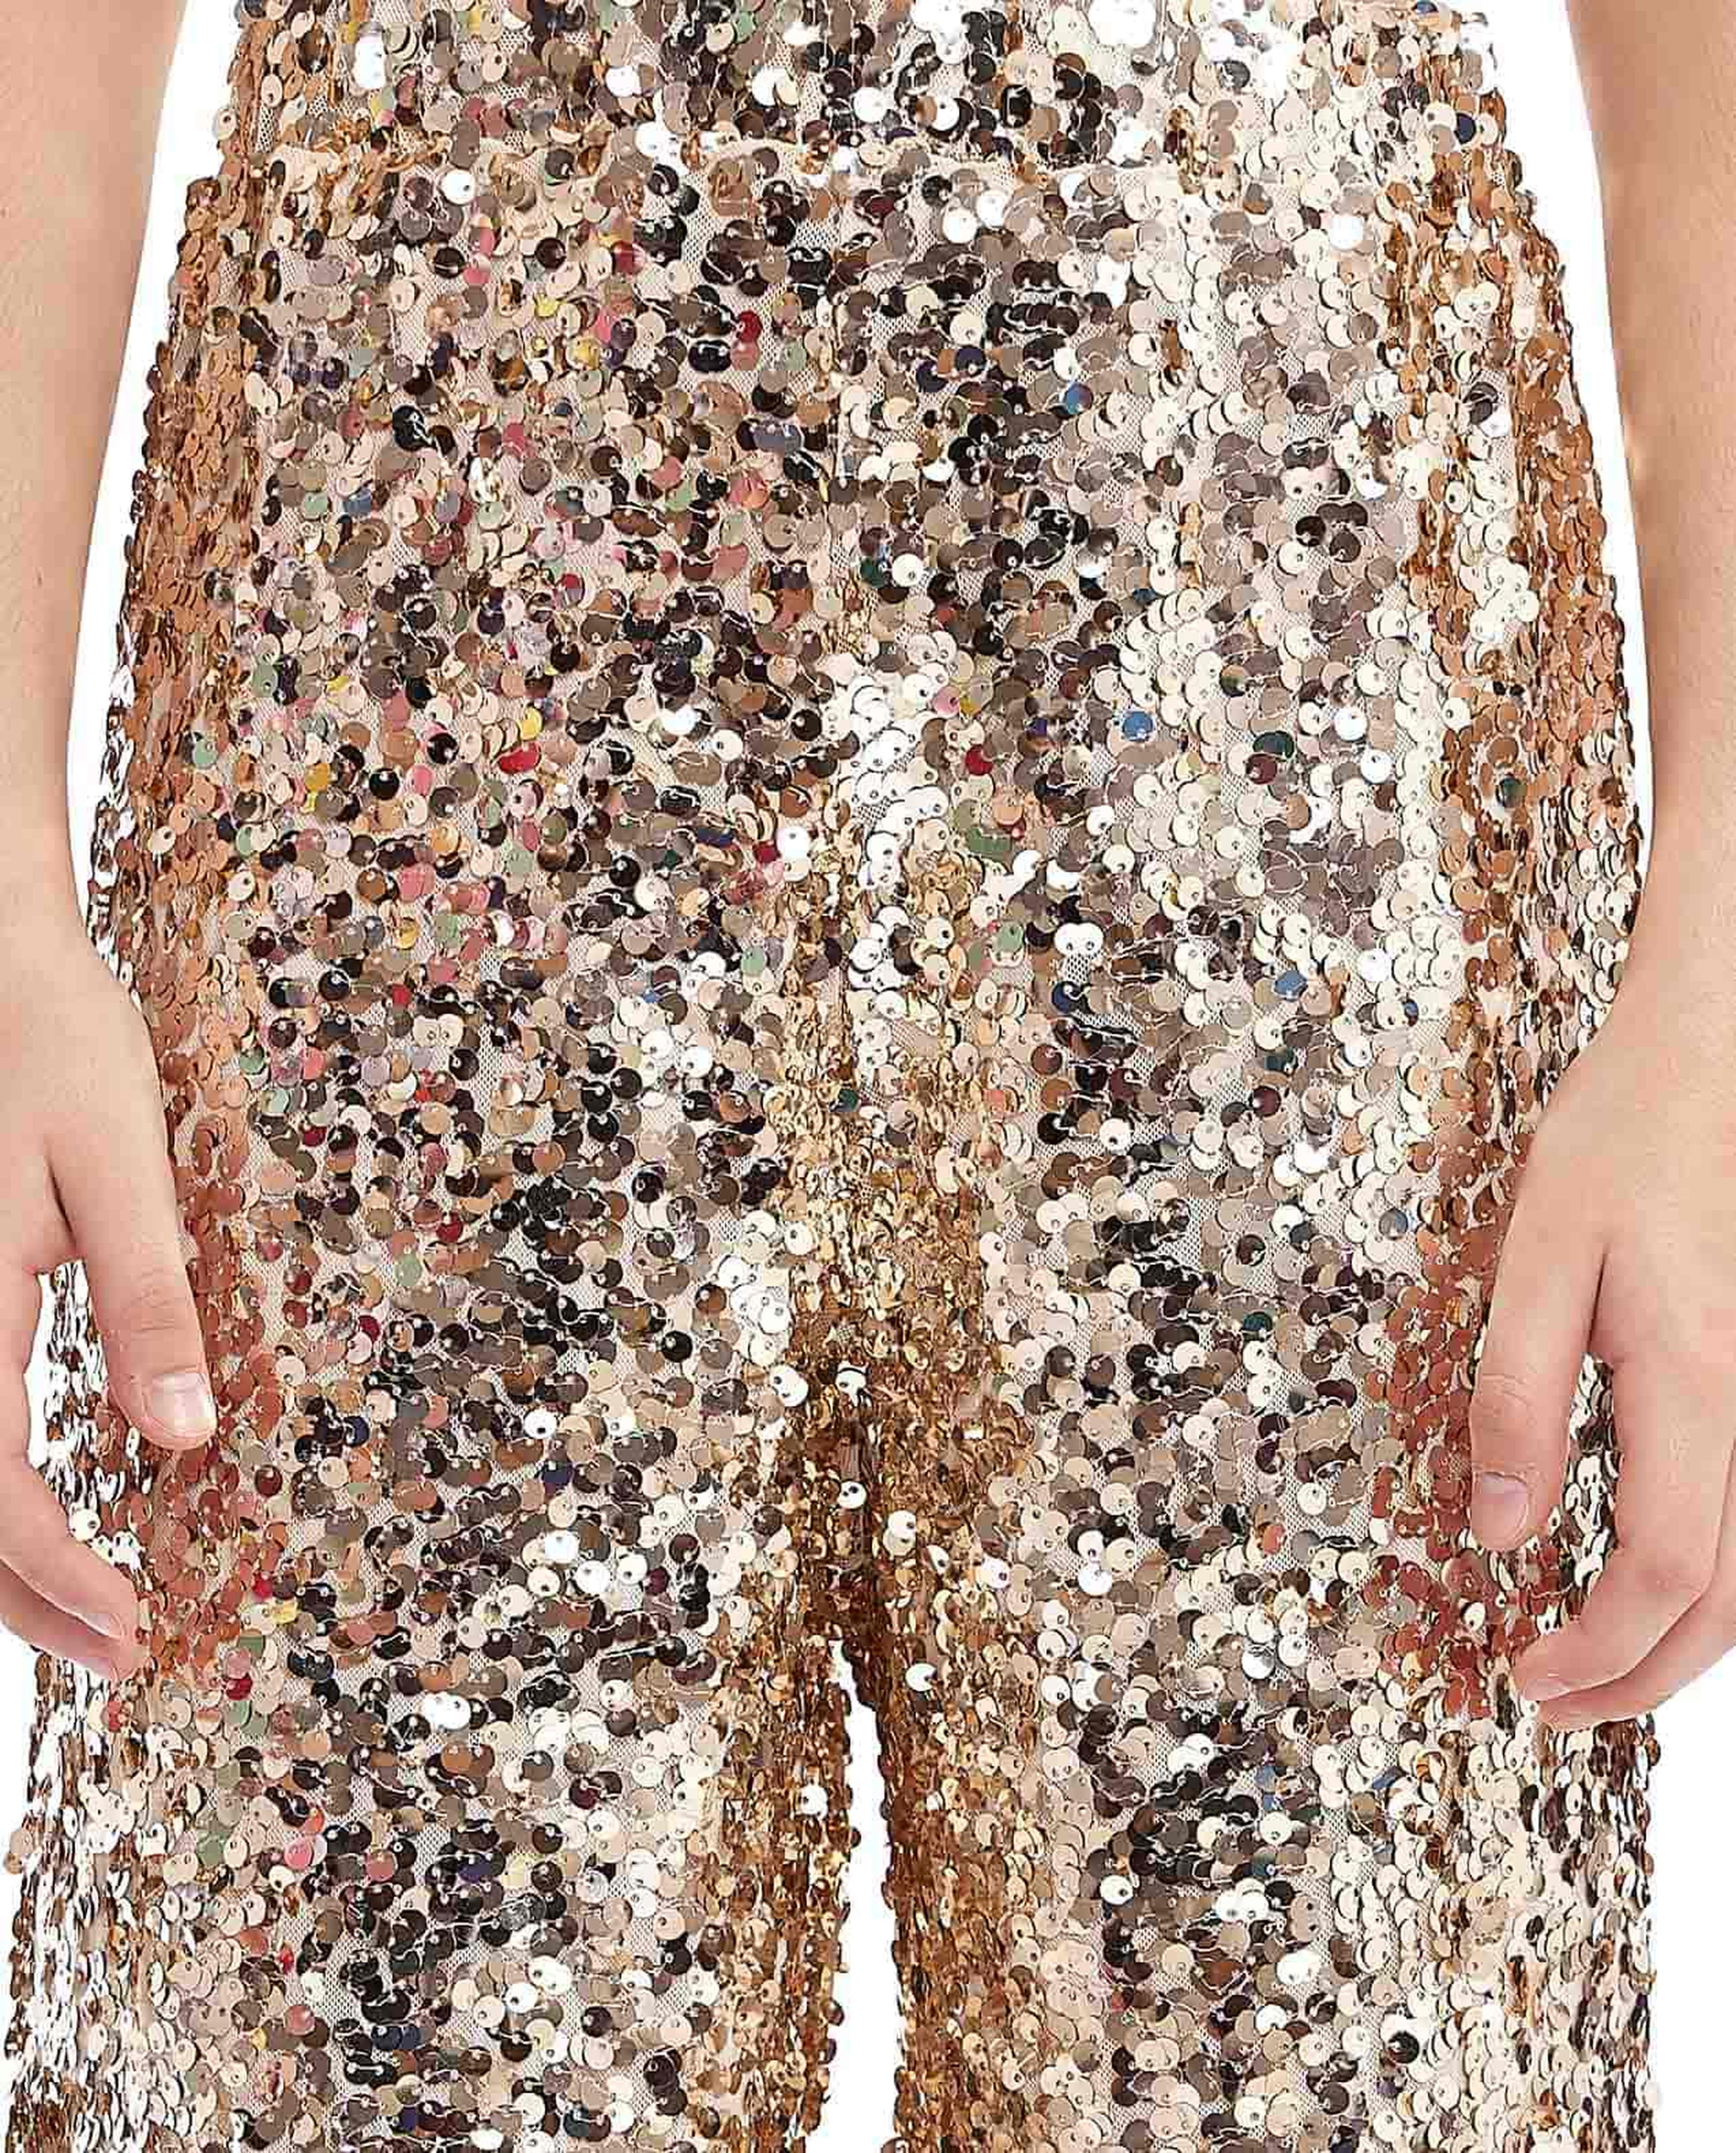 Sequined Top and Trouser Set